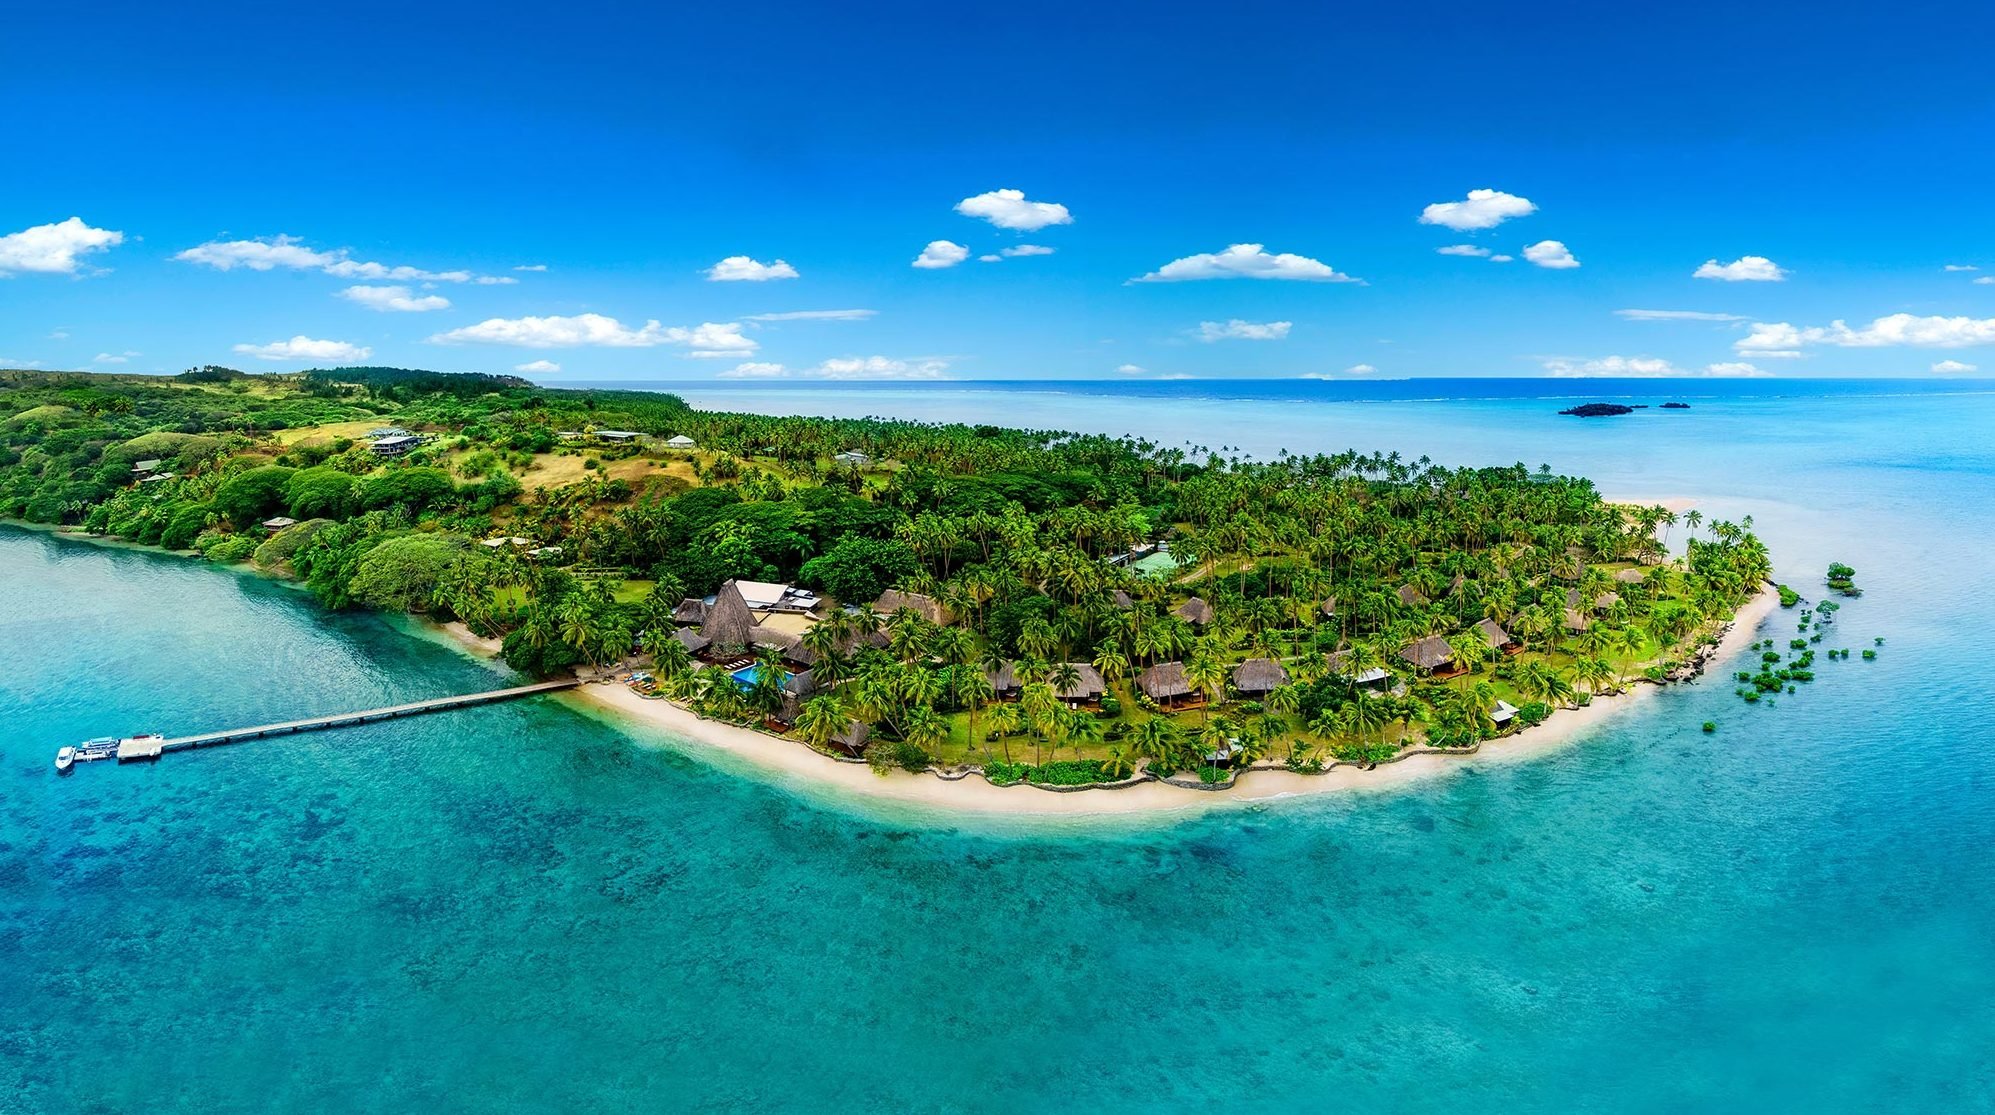 Jean-Michel Cousteau Resort, Fiji: Where Conservation and Tourism Meet